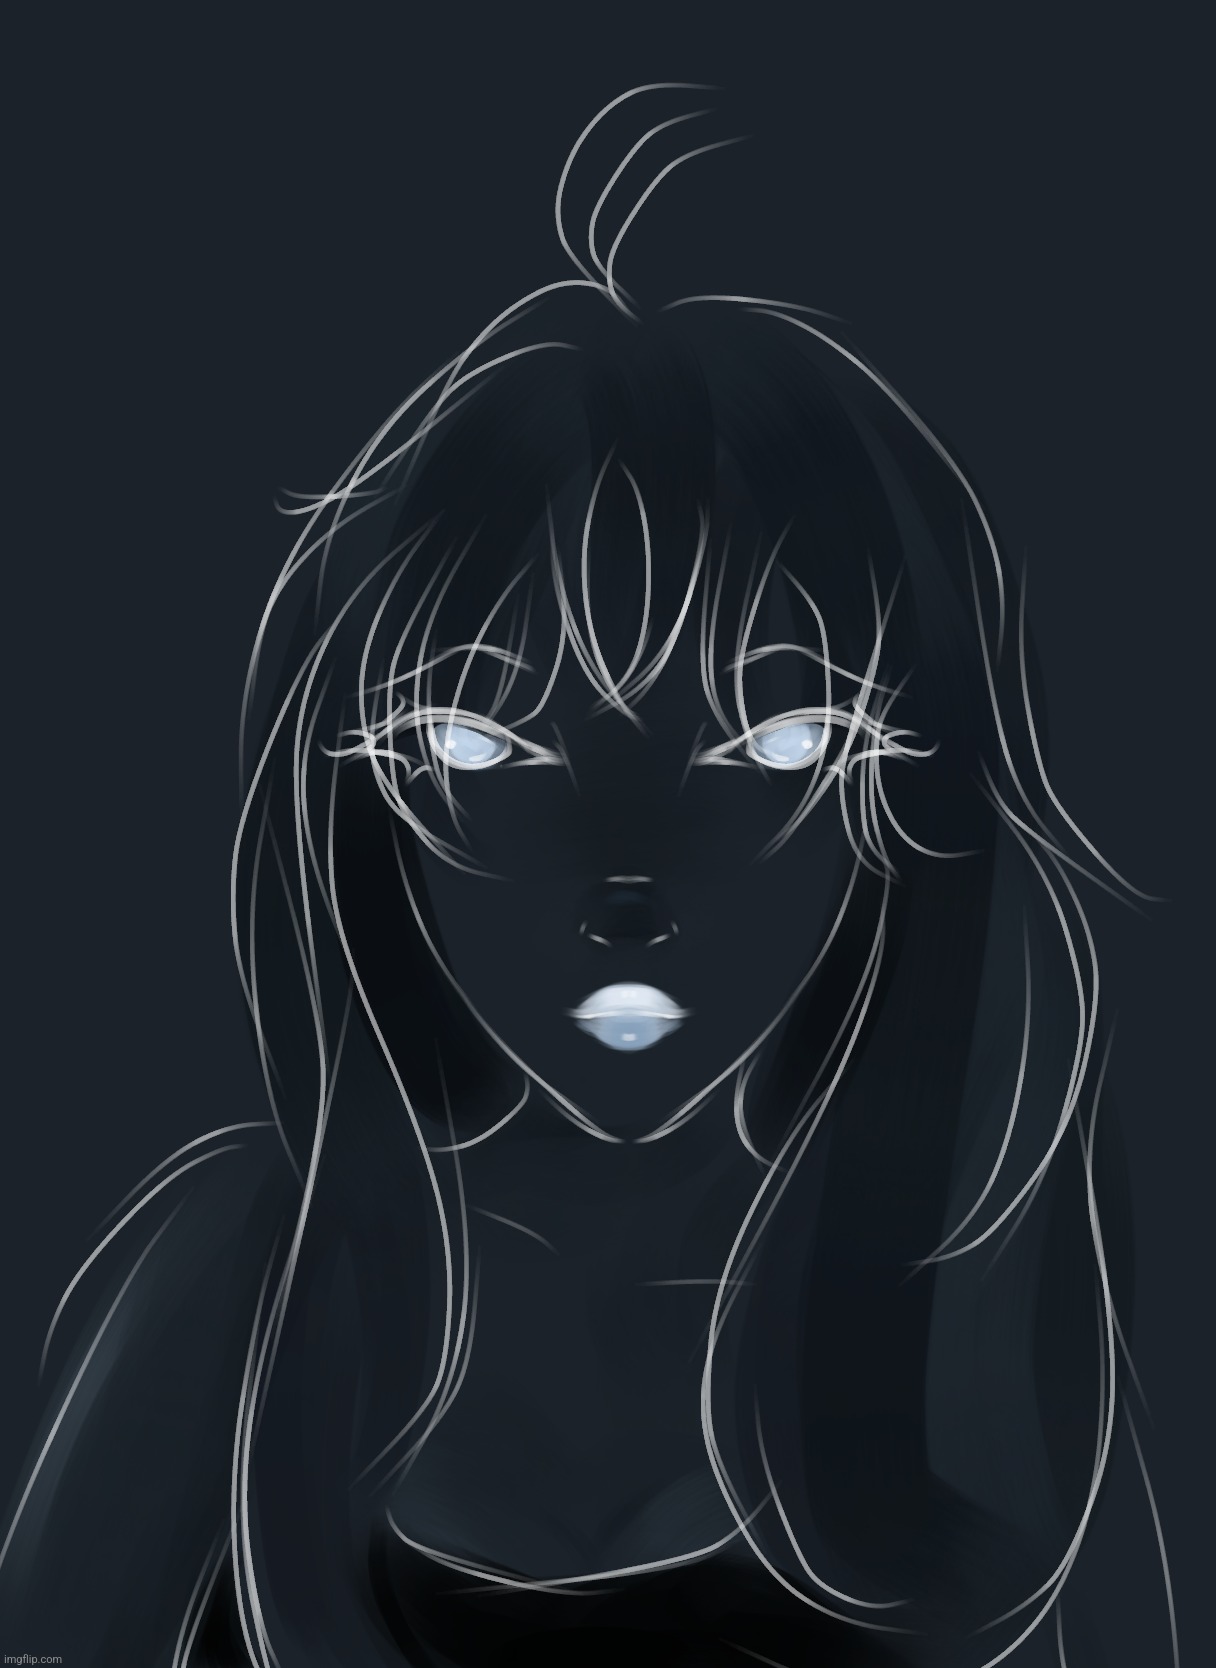 Tried smth neww | image tagged in sketch,drawing,art,idk | made w/ Imgflip meme maker